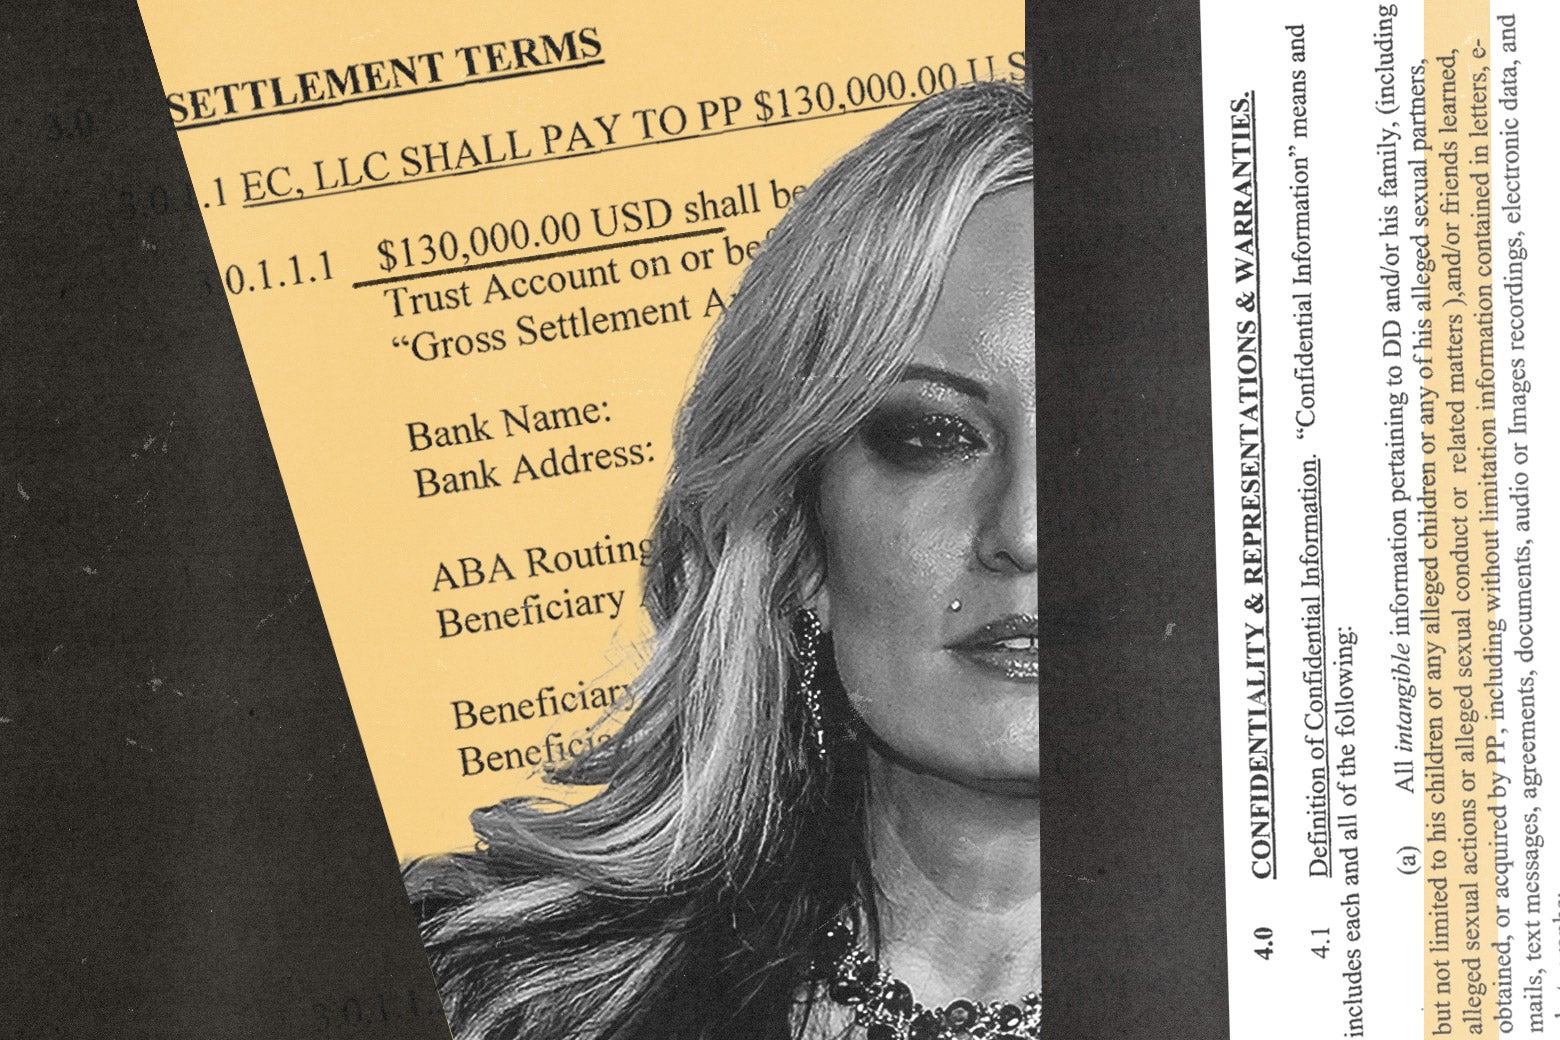 Trump’s Lawyer Mounted an All-Out Assault on Stormy Daniels’ Character. It Didn’t Work. Jeremy Stahl